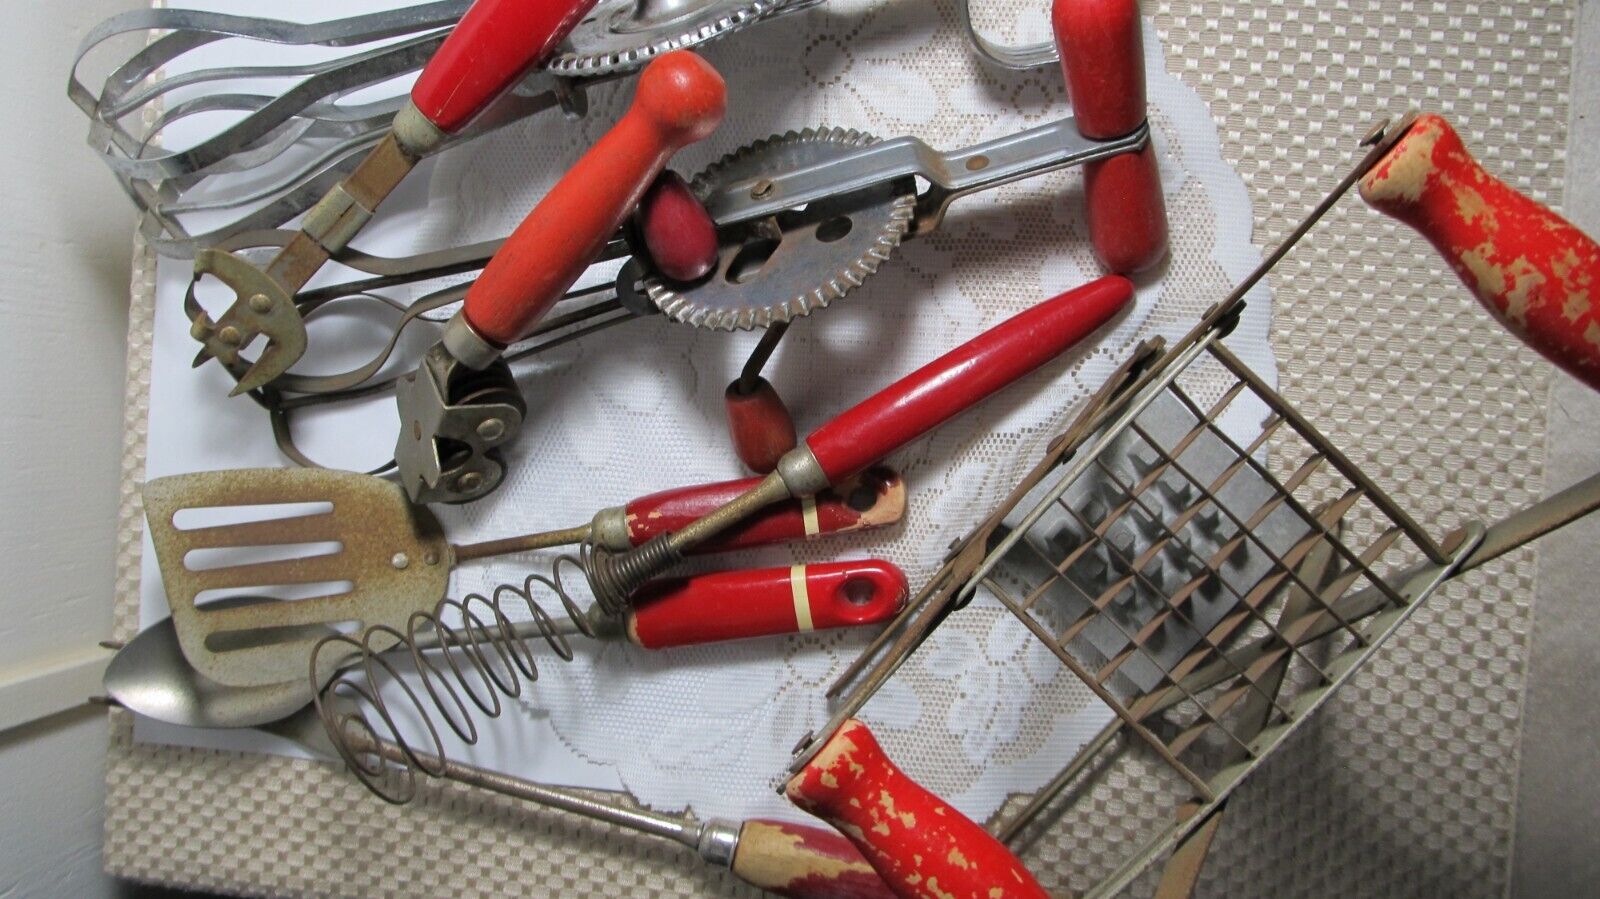 lot of 9 vintage kitchen tools utensils with red and white handles ~ show only